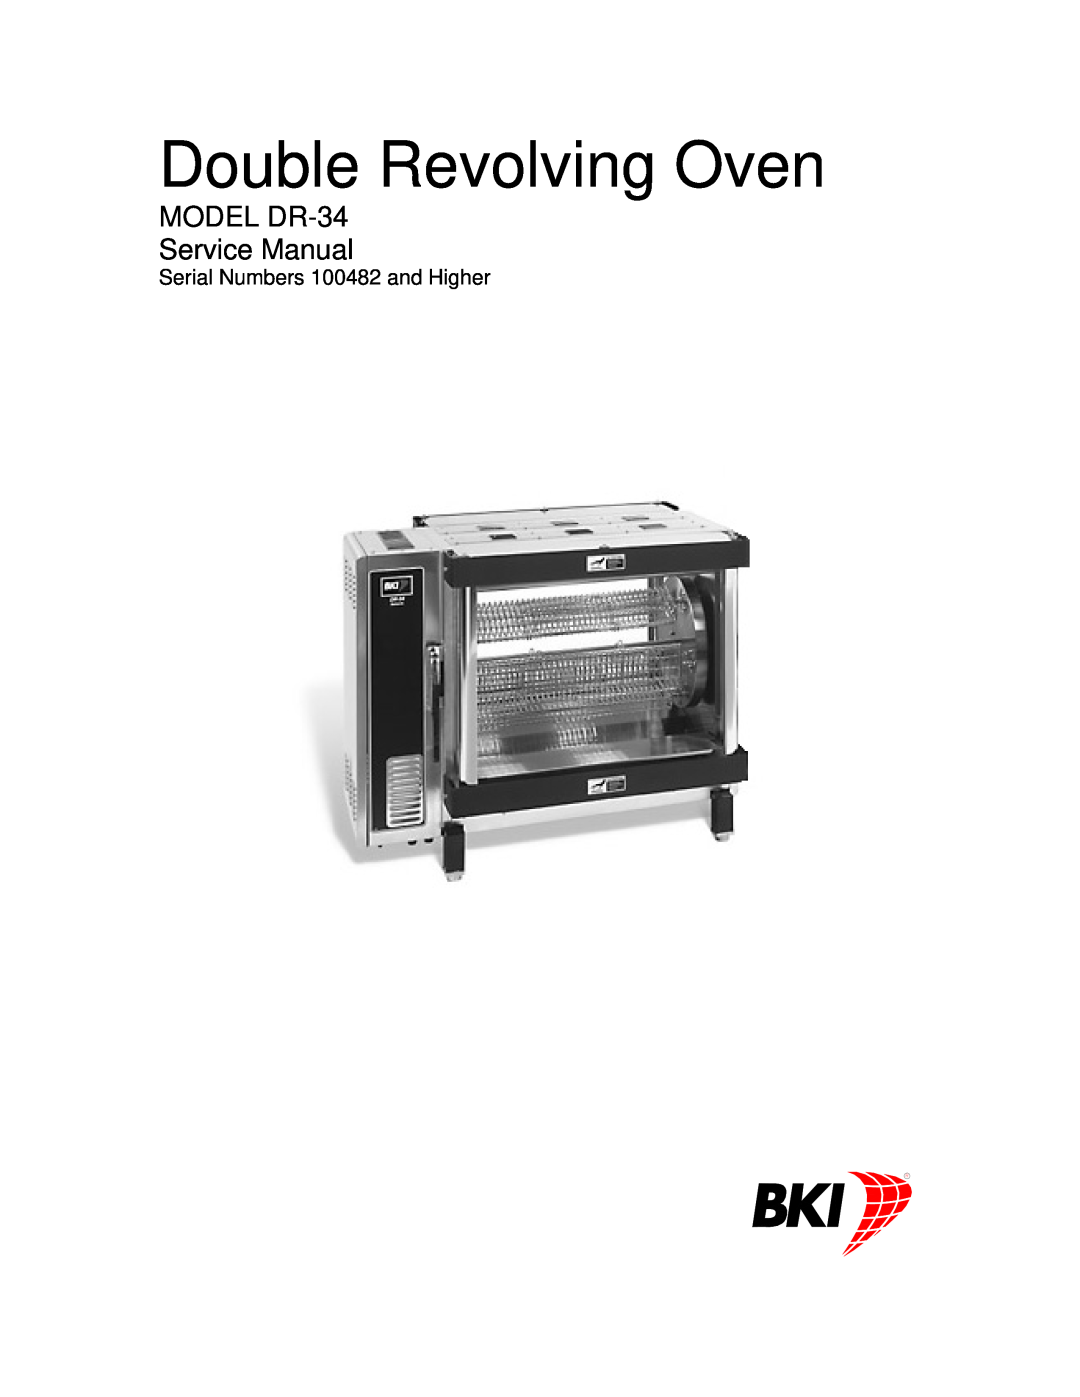 Bakers Pride Oven DR-34 service manual Double Revolving Oven, Serial Numbers 100482 and Higher 